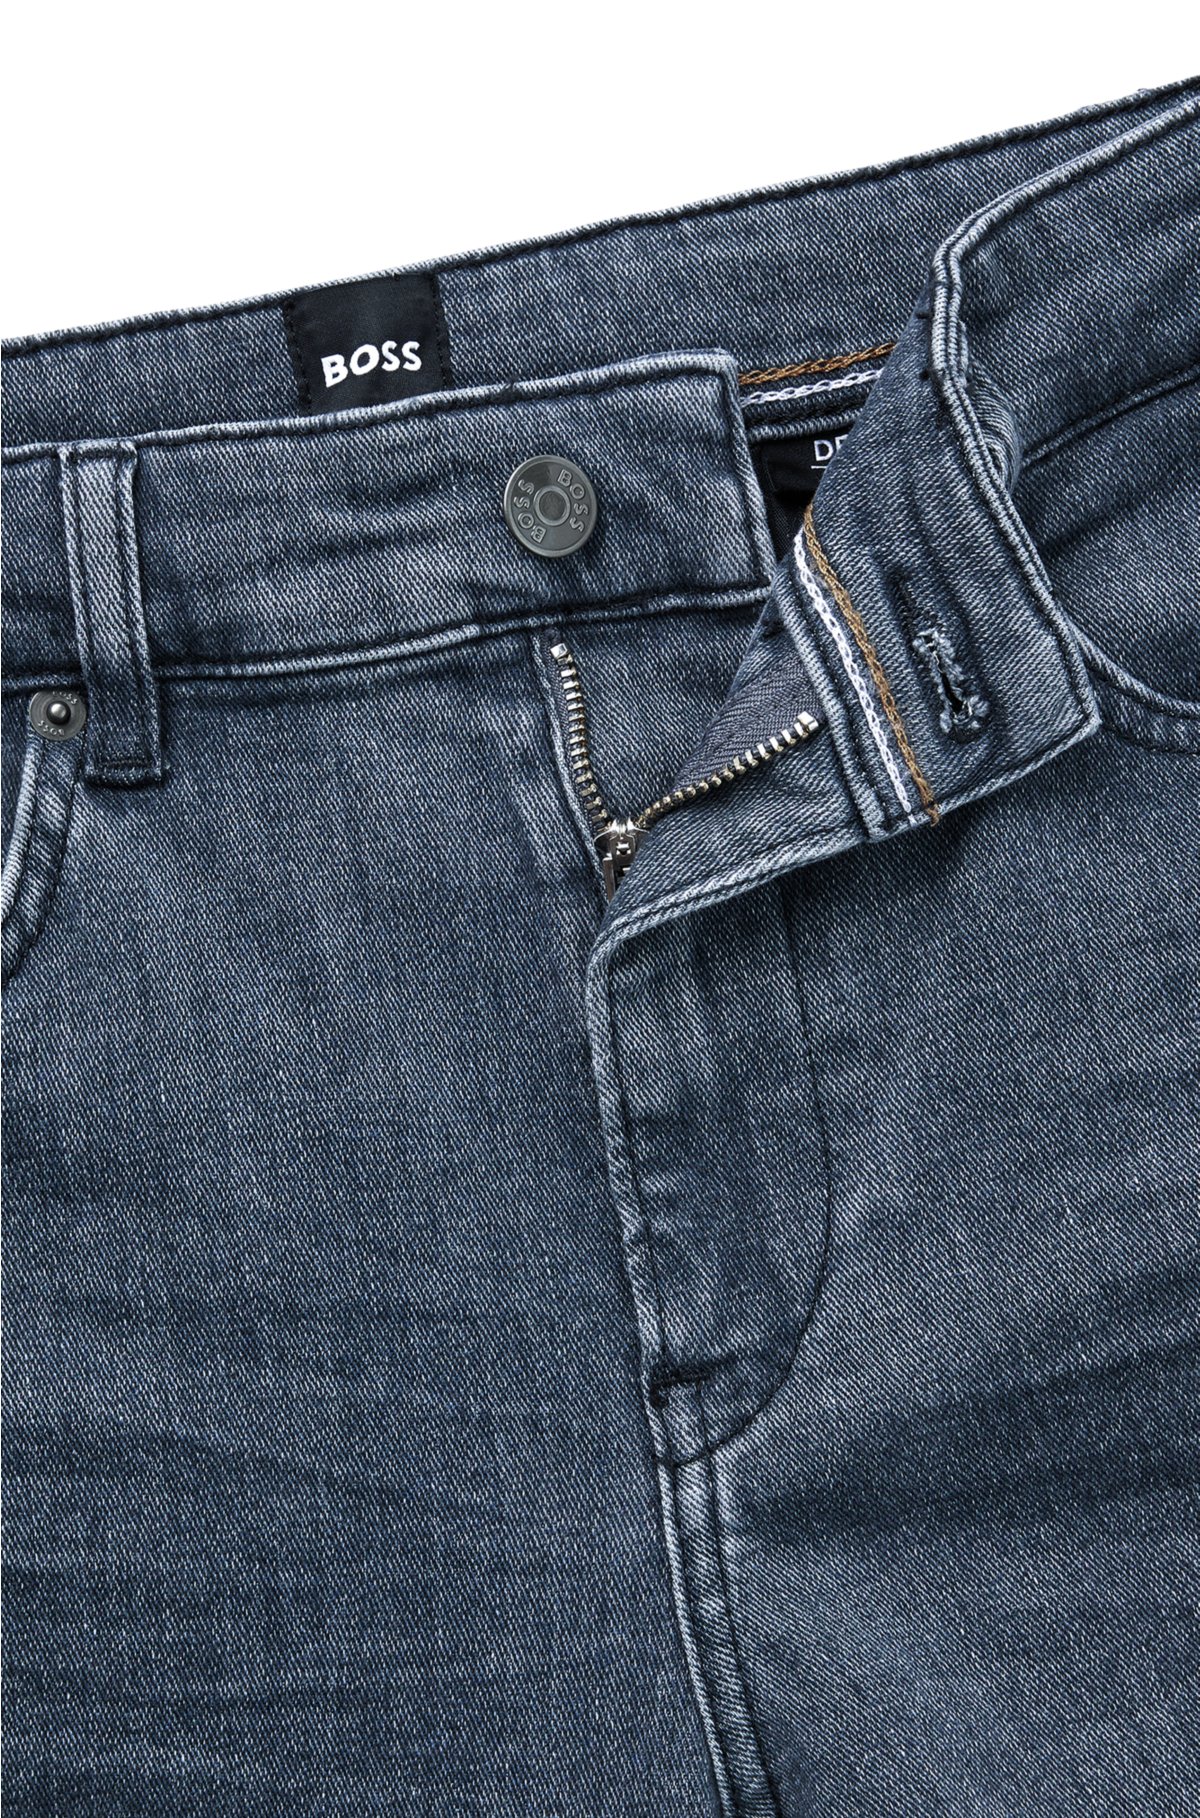 Italian Slim-fit BOSS jeans gray in denim cashmere-touch -